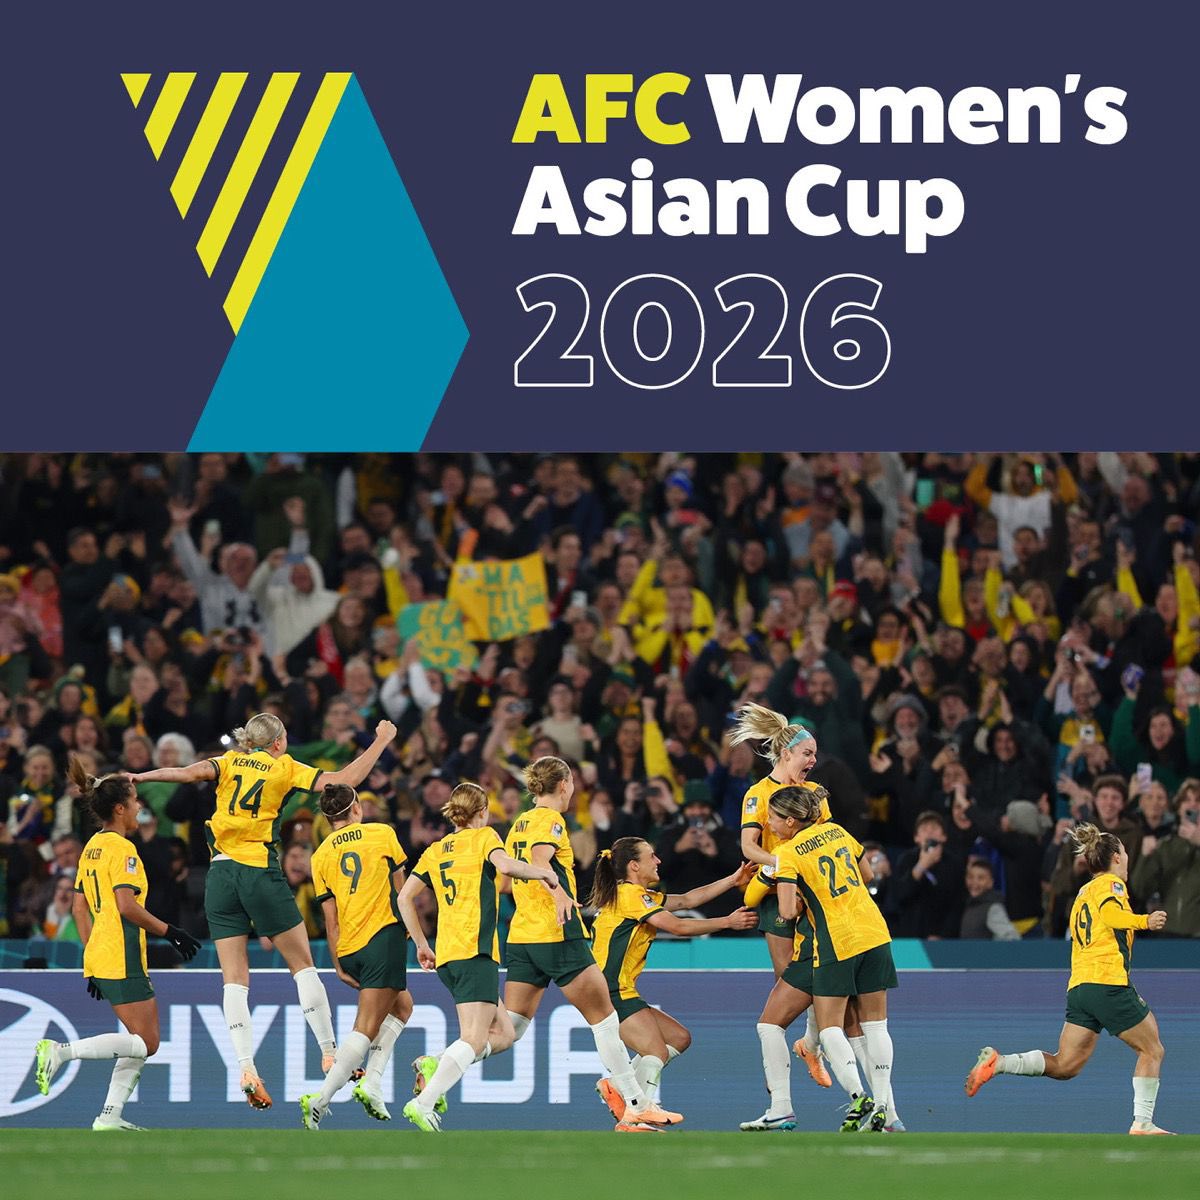 Proud that once again Australia will be hosting a premier women’s sporting event - @theafcdotcom Women’s Asian Cup 2026 🇦🇺 ⚽ We wish all @afcasiancup nations the best in the lead up to this fantastic tournament #WAC2026 MD🇦🇺